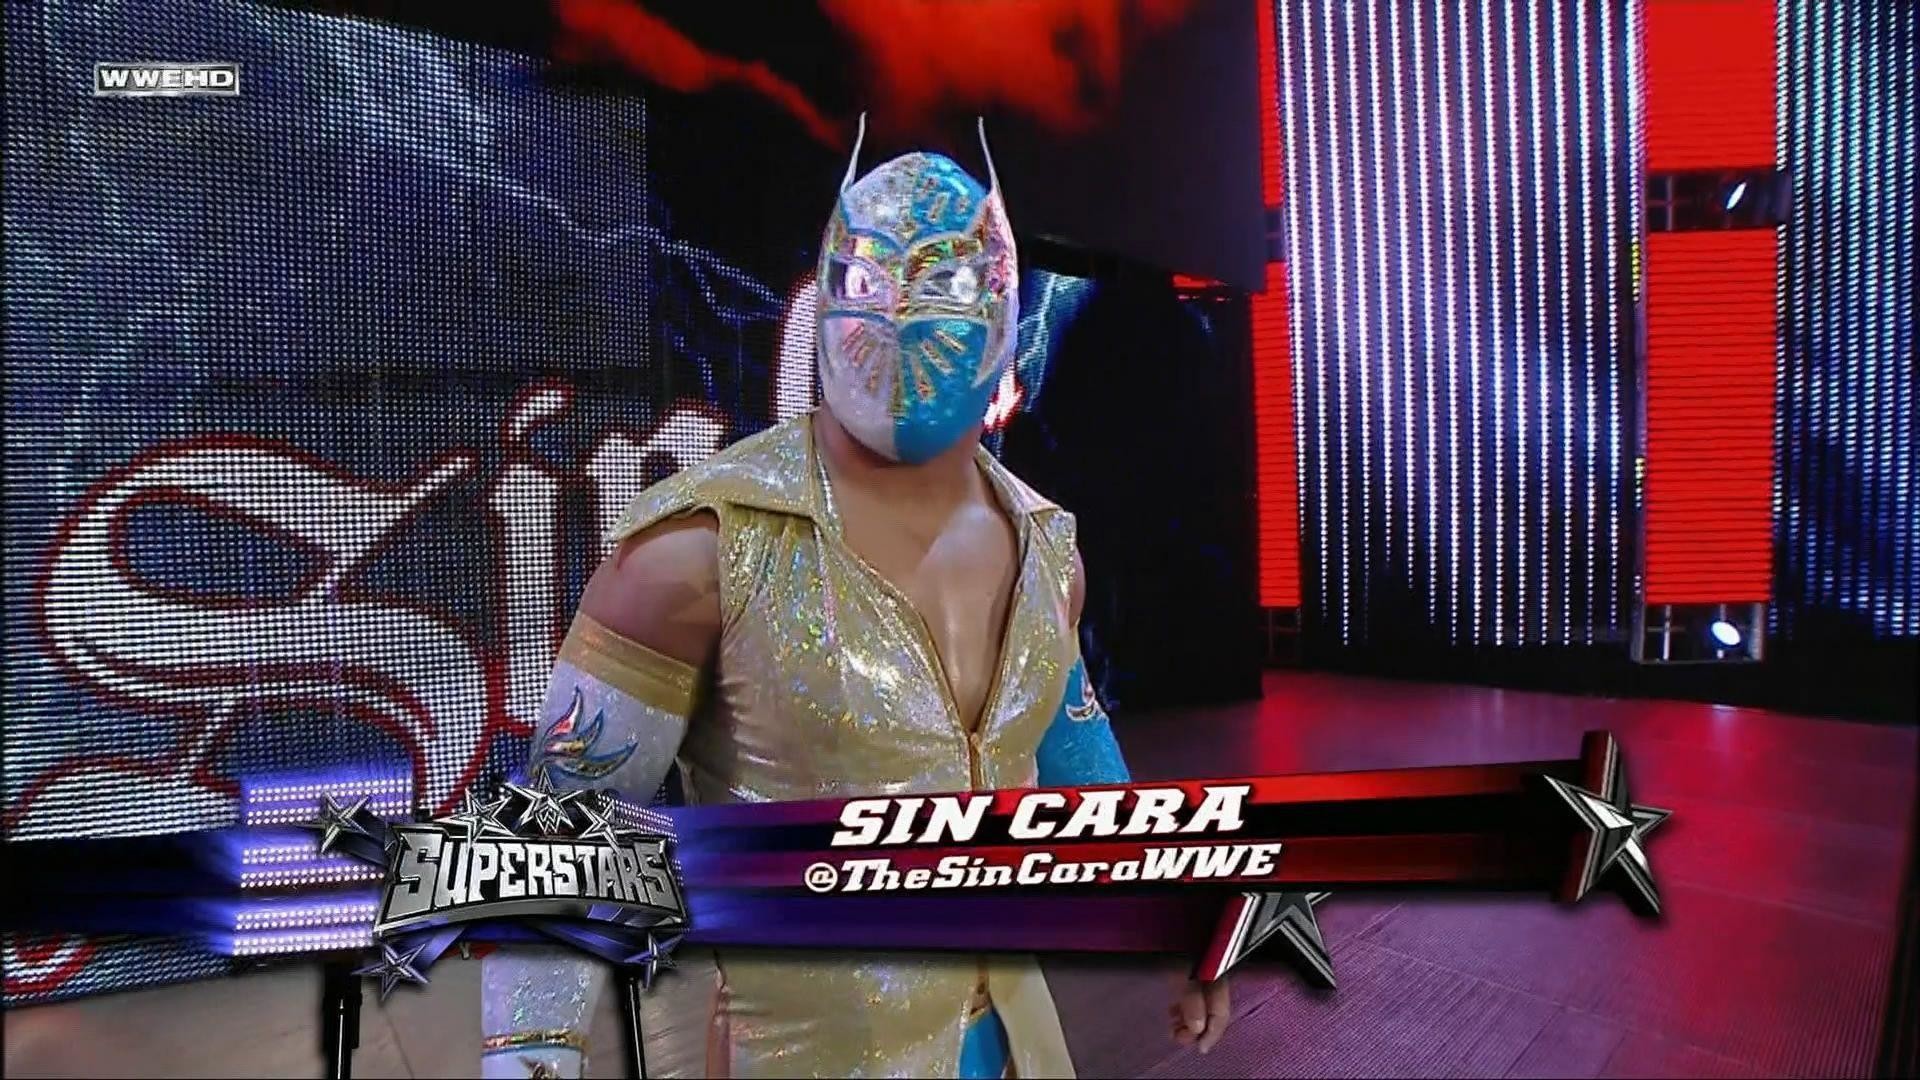 Sin Cara Wwe Hd Wallpaper Background Wallpapers For Your Desktop 1920x1080